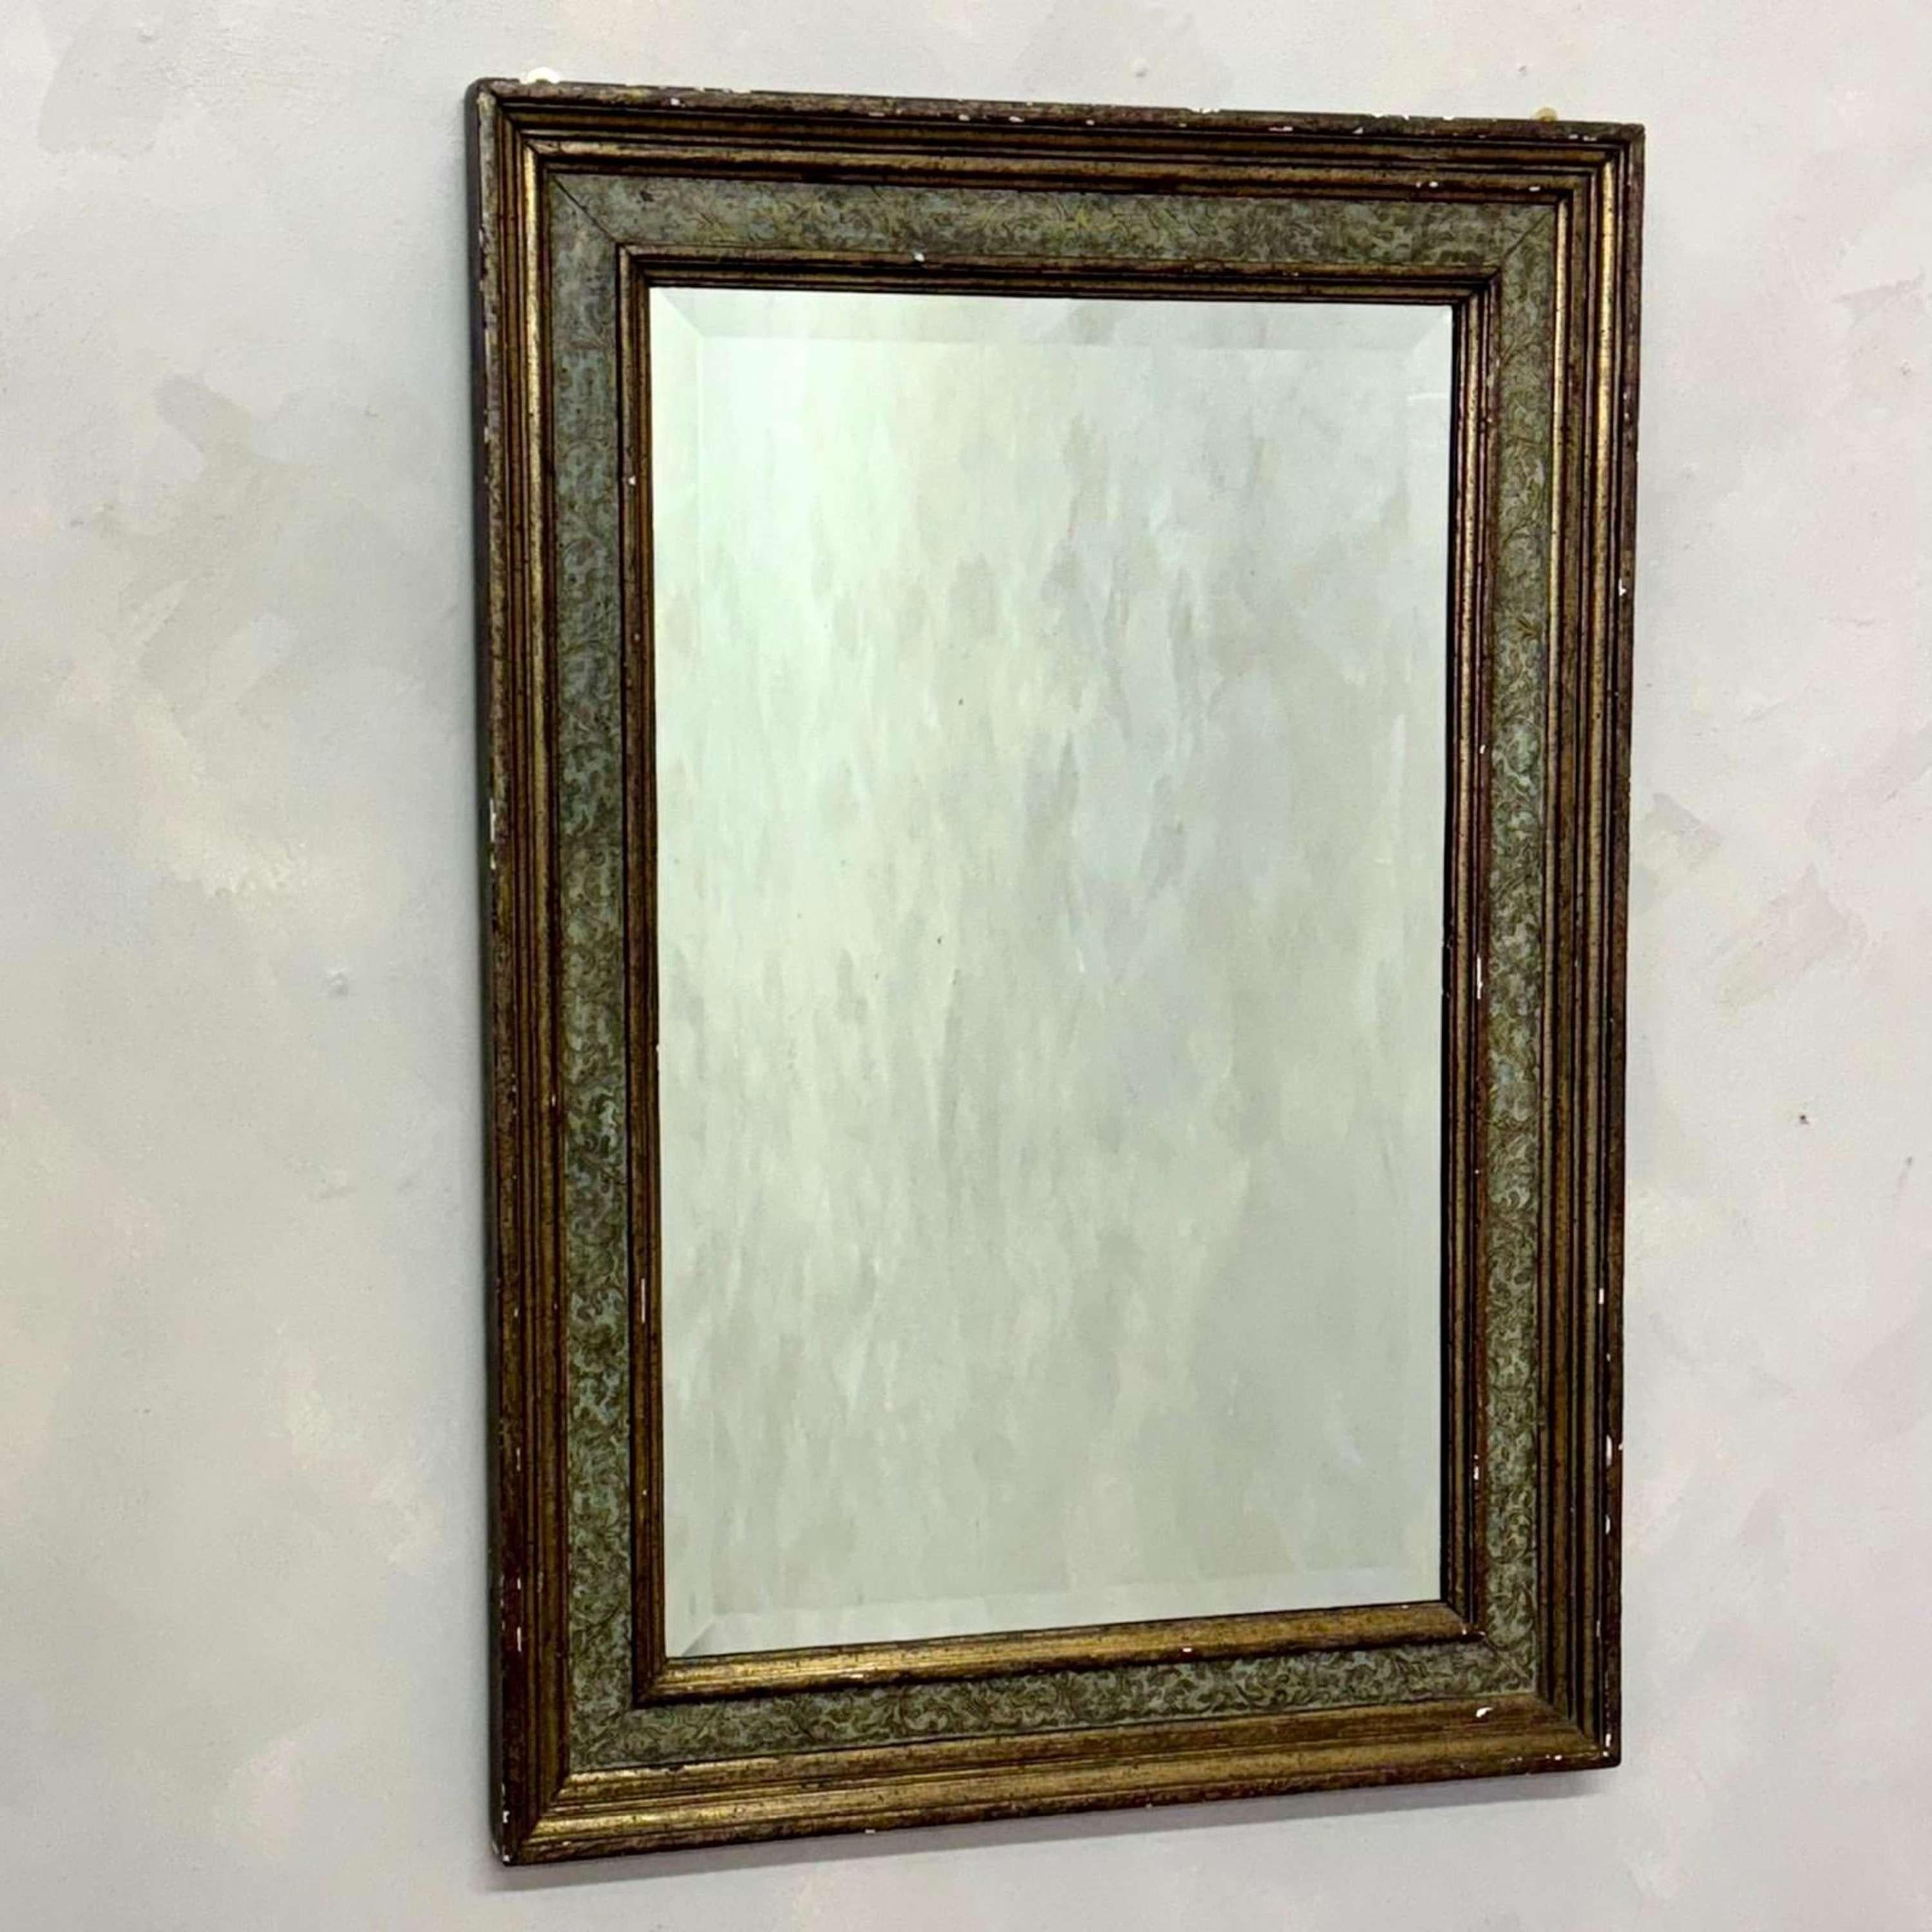 Italian, hand painted and gilded mirror,  fine finished gold detail.
Recent bevelled mirror plate.
Italy, circa 1890.

Height - 91.5 cm
Width - 64.5 cm
Depth - 4 cm

Please message if any further info or photos are required 

We are happy to work